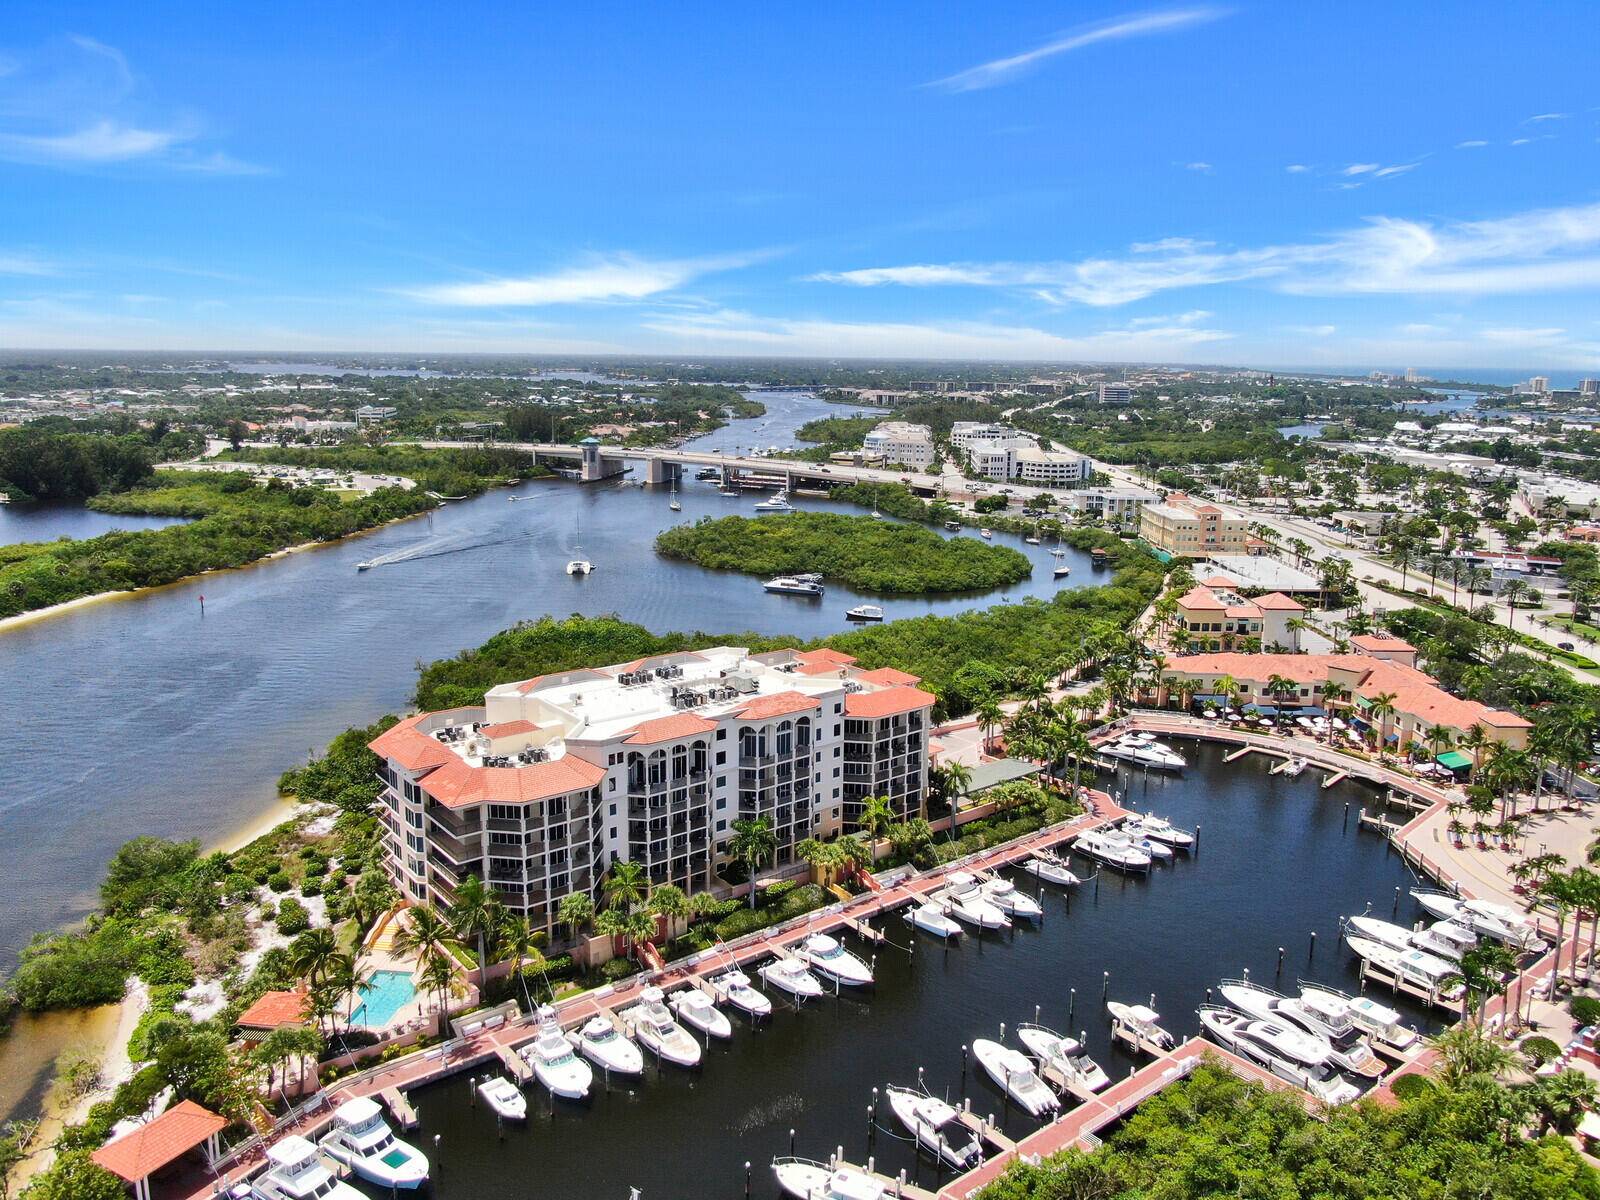 Experience all that waterfront living has to offer from one of the most desirable luxury condo buildings in sunny Jupiter, Florida.